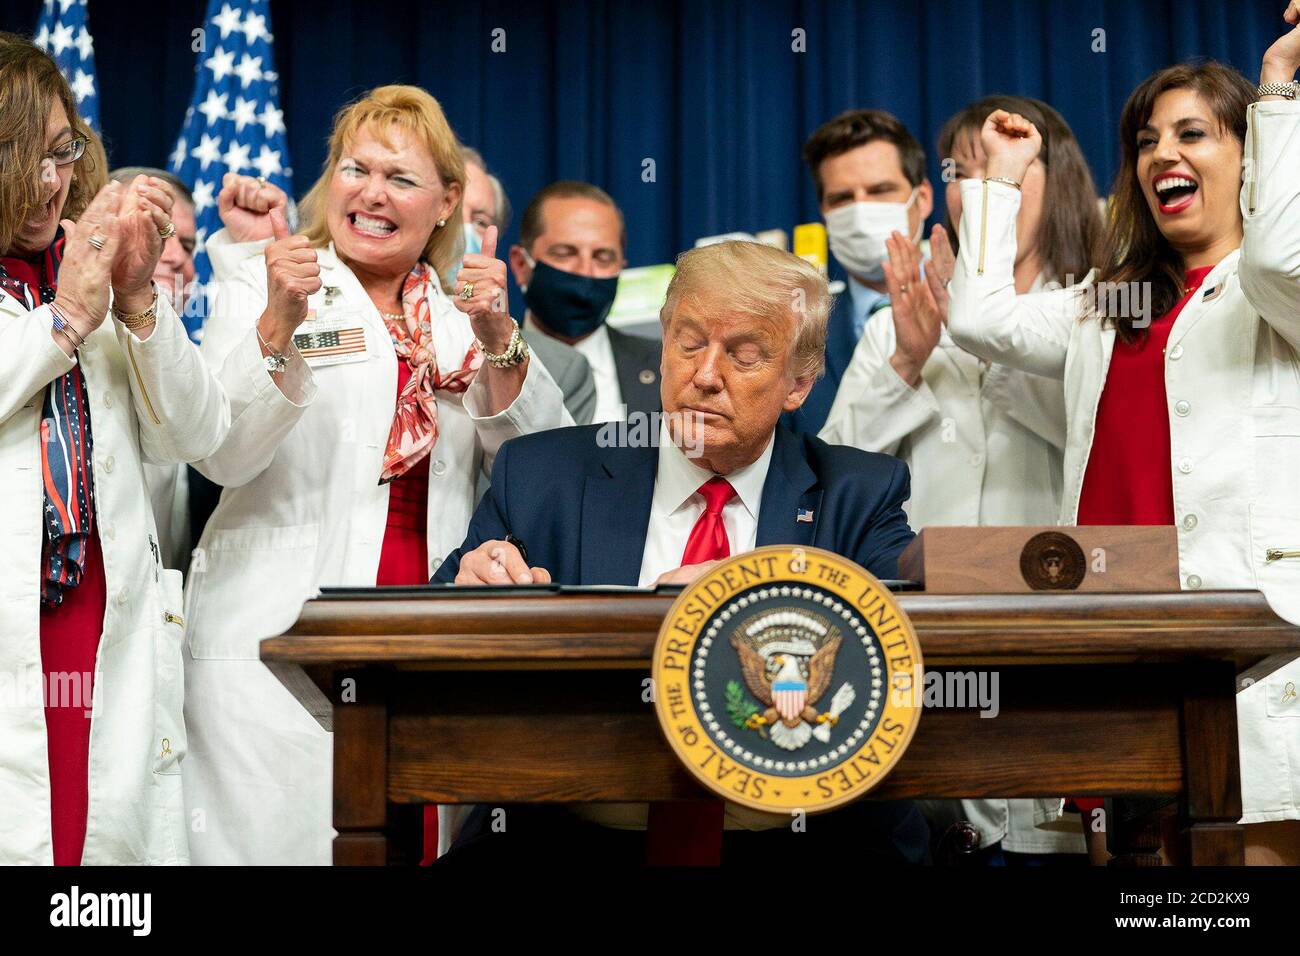 President Donald J. Trump is applauded as he signs a series of Executive Orders on lowering drug prices Friday, July 24, 2020, in the South Court Auditorium in the Eisenhower Executive Office Building at the White House. Stock Photo